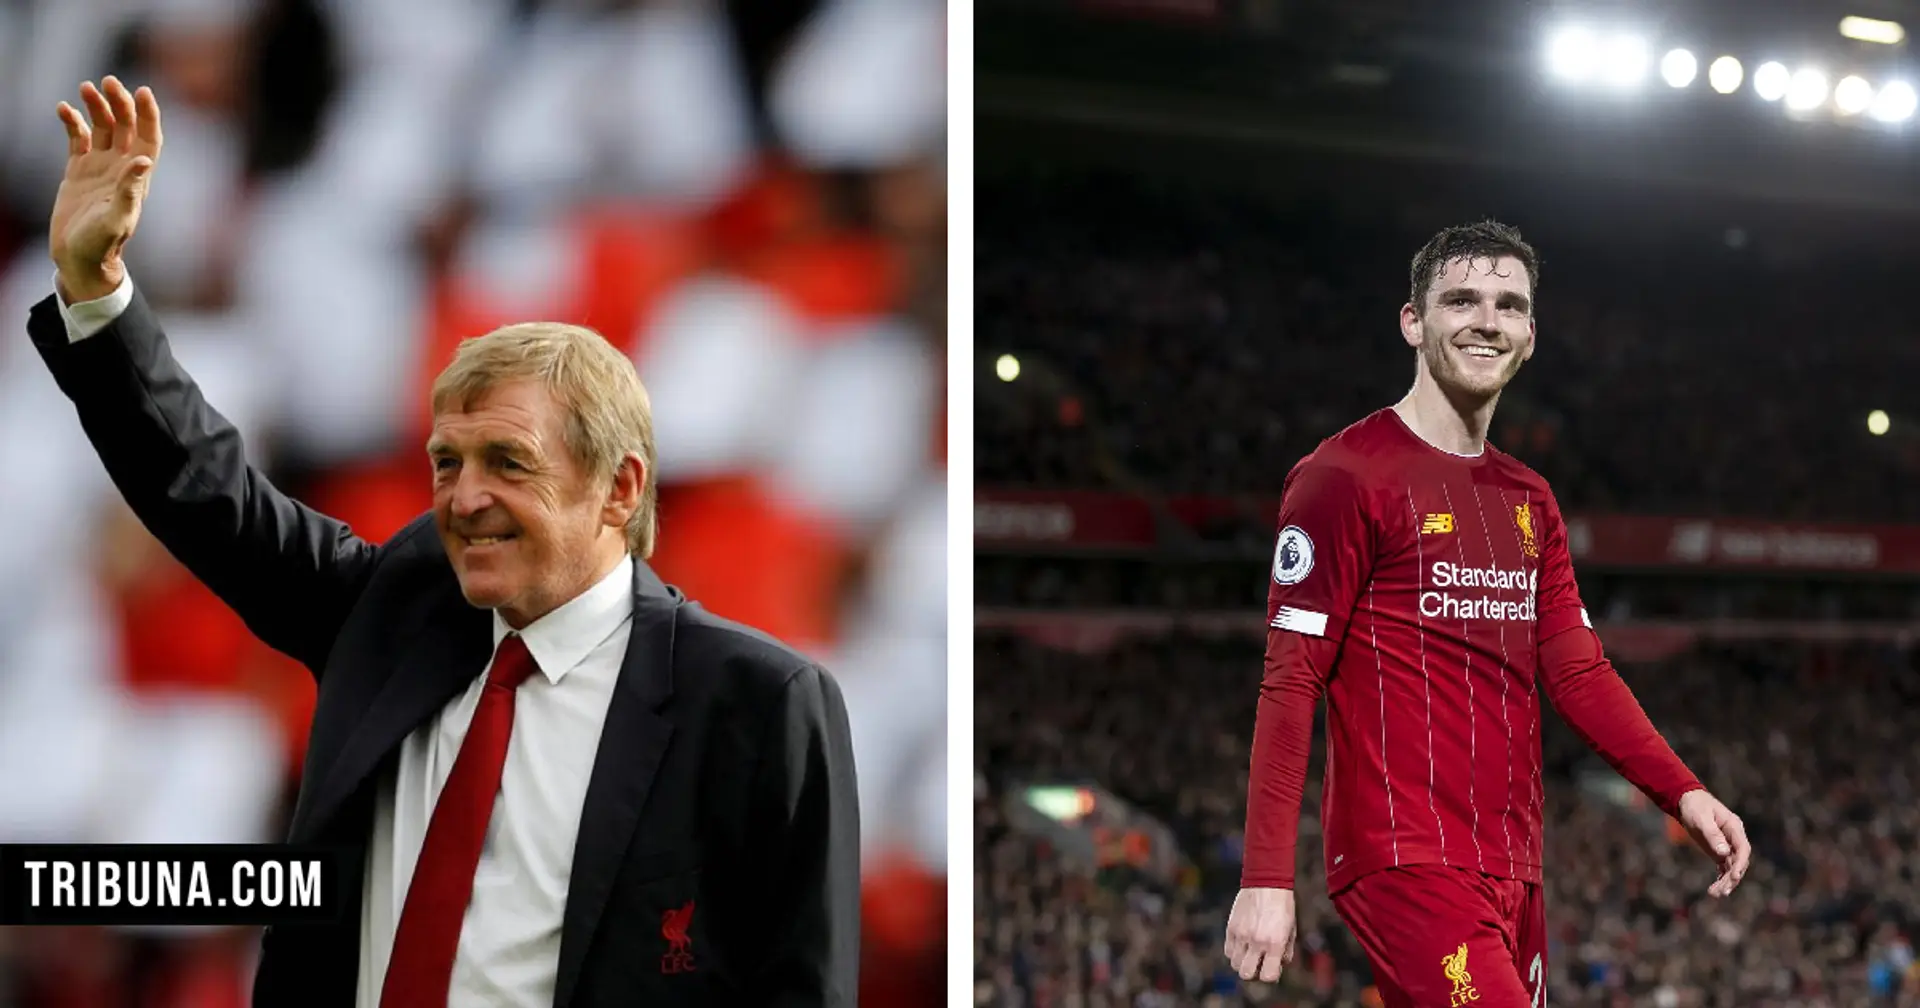 'He's a fantastic advert for Scottish football': Sir Kenny praises Andy Robertson's career for Liverpool and Scotland